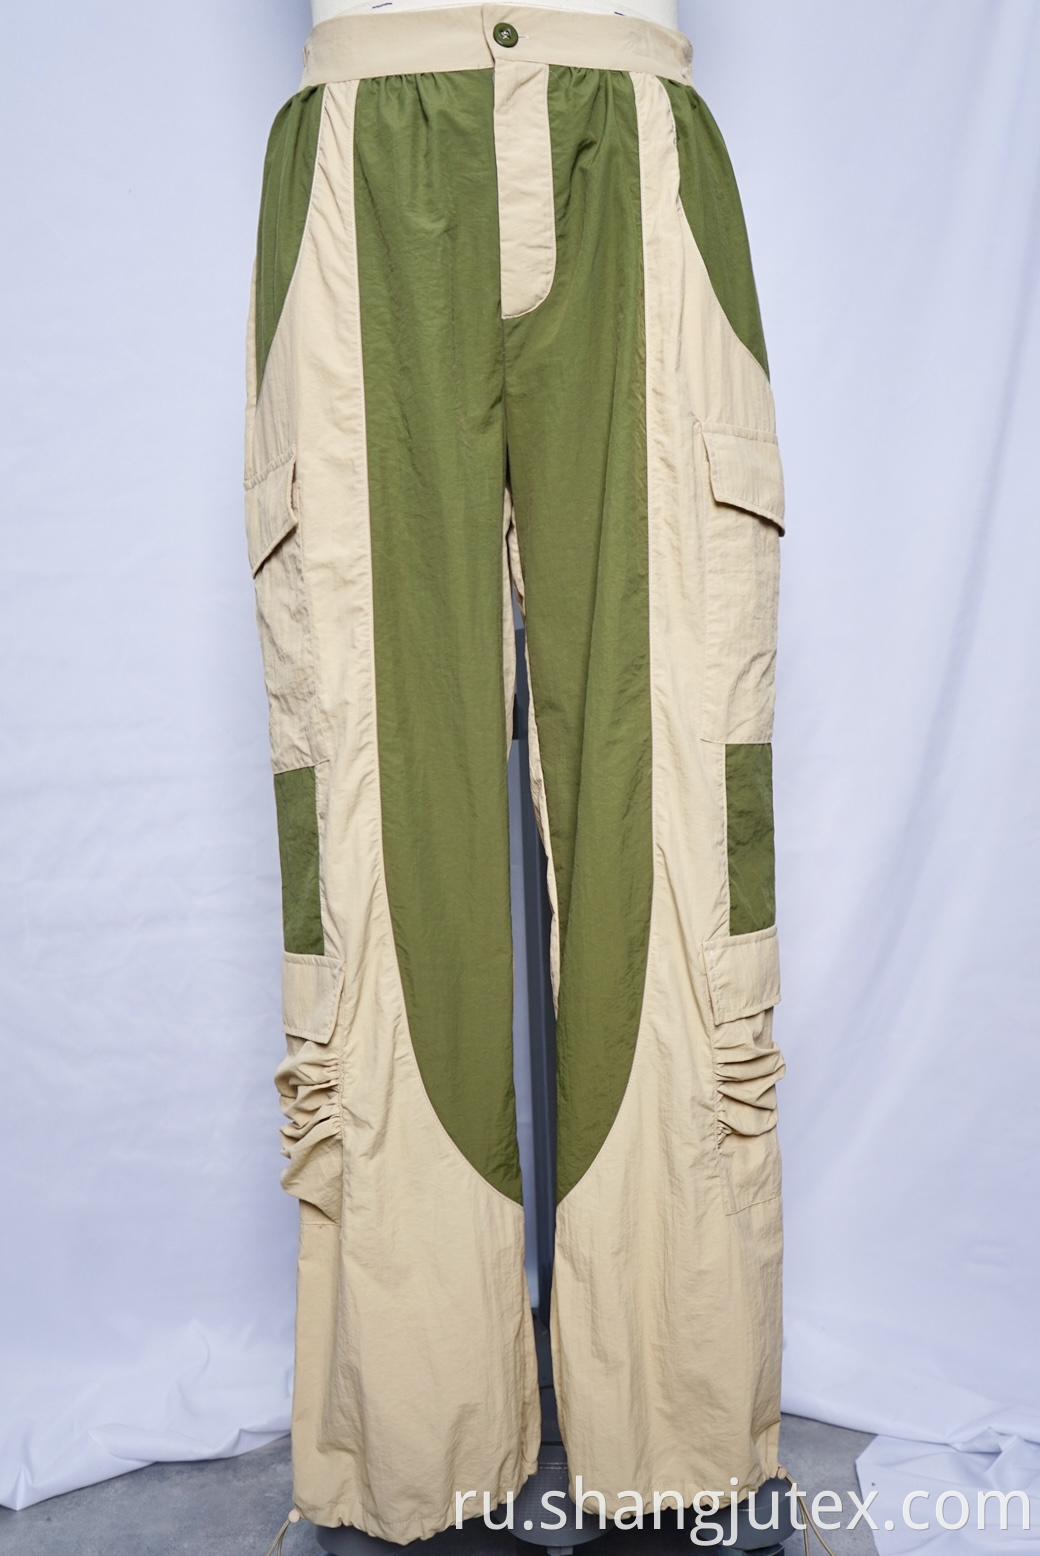 Combination of khaki and military green colors of pants 